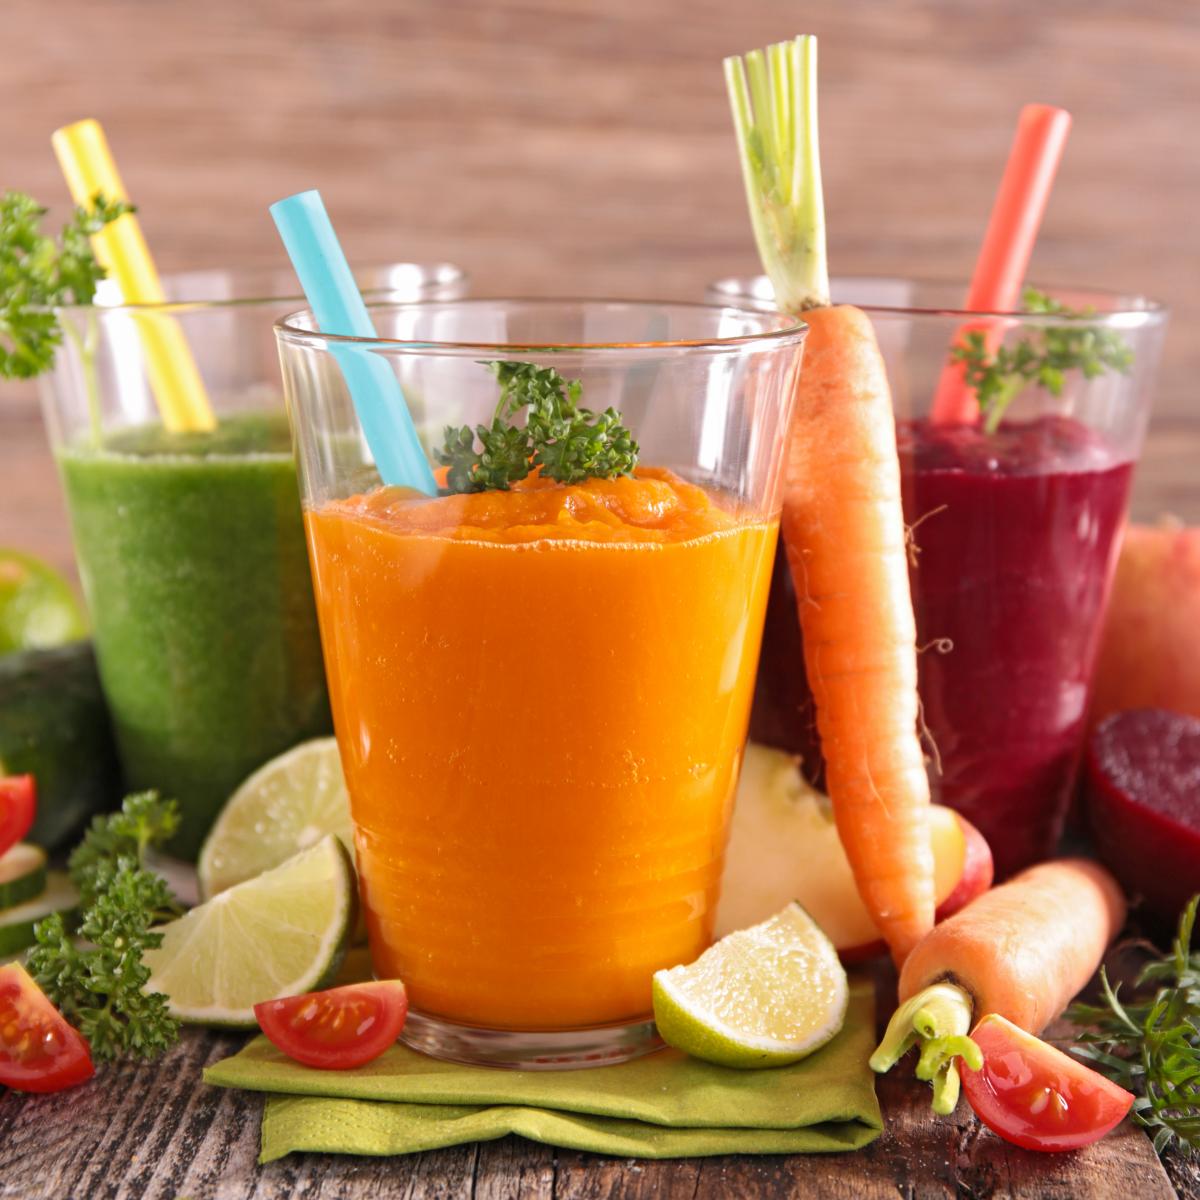 Fruit juices/smoothies